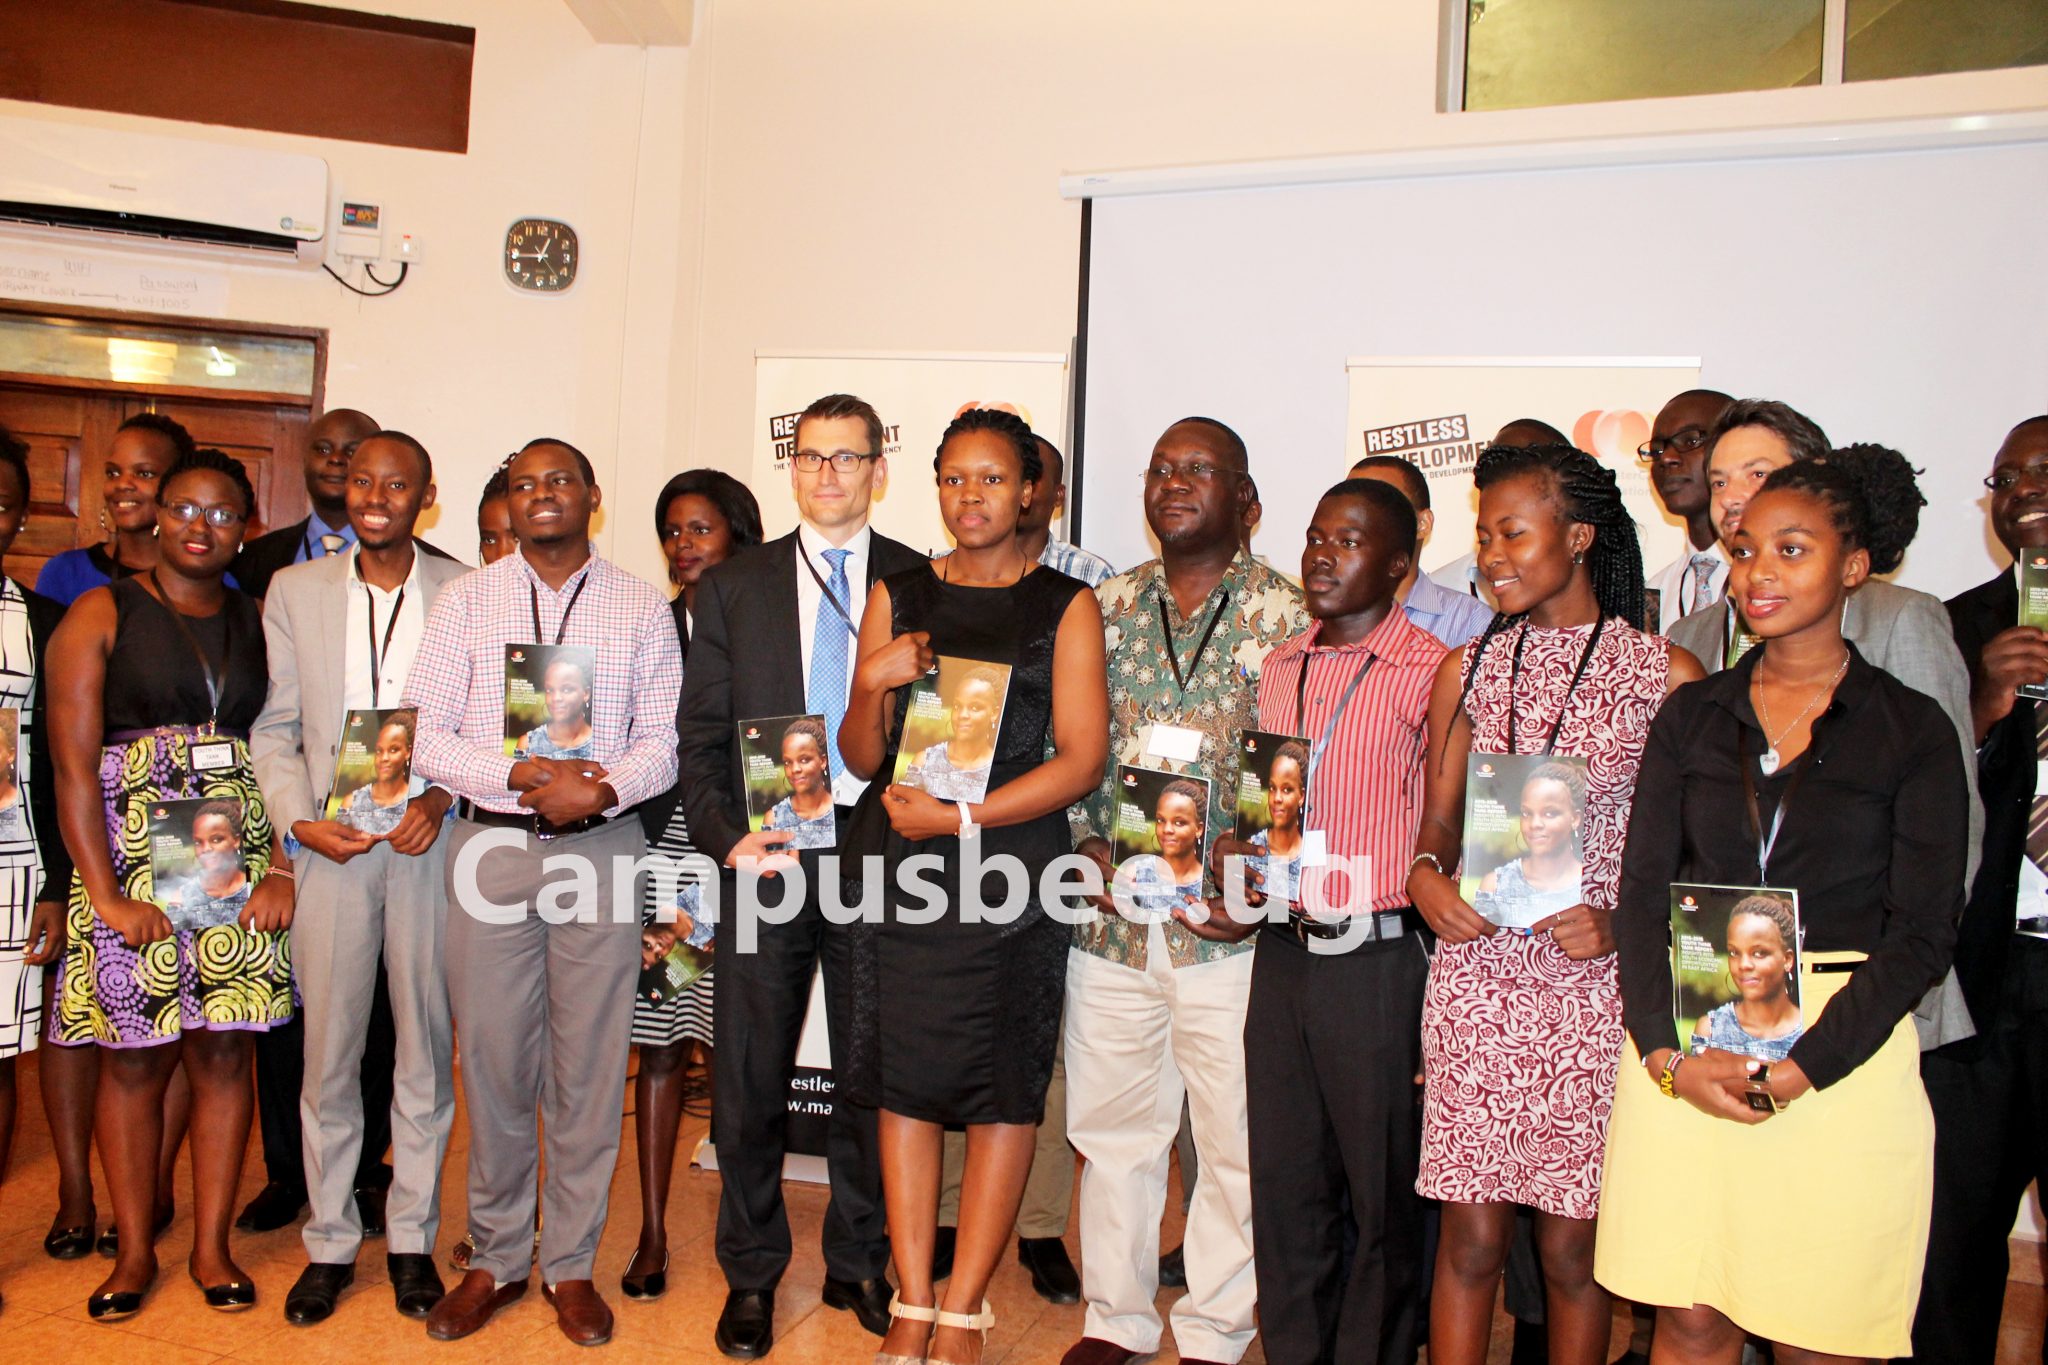 A group photo involving the Restless Development and MasterCard foundation members holding the Youth Think Tank Report